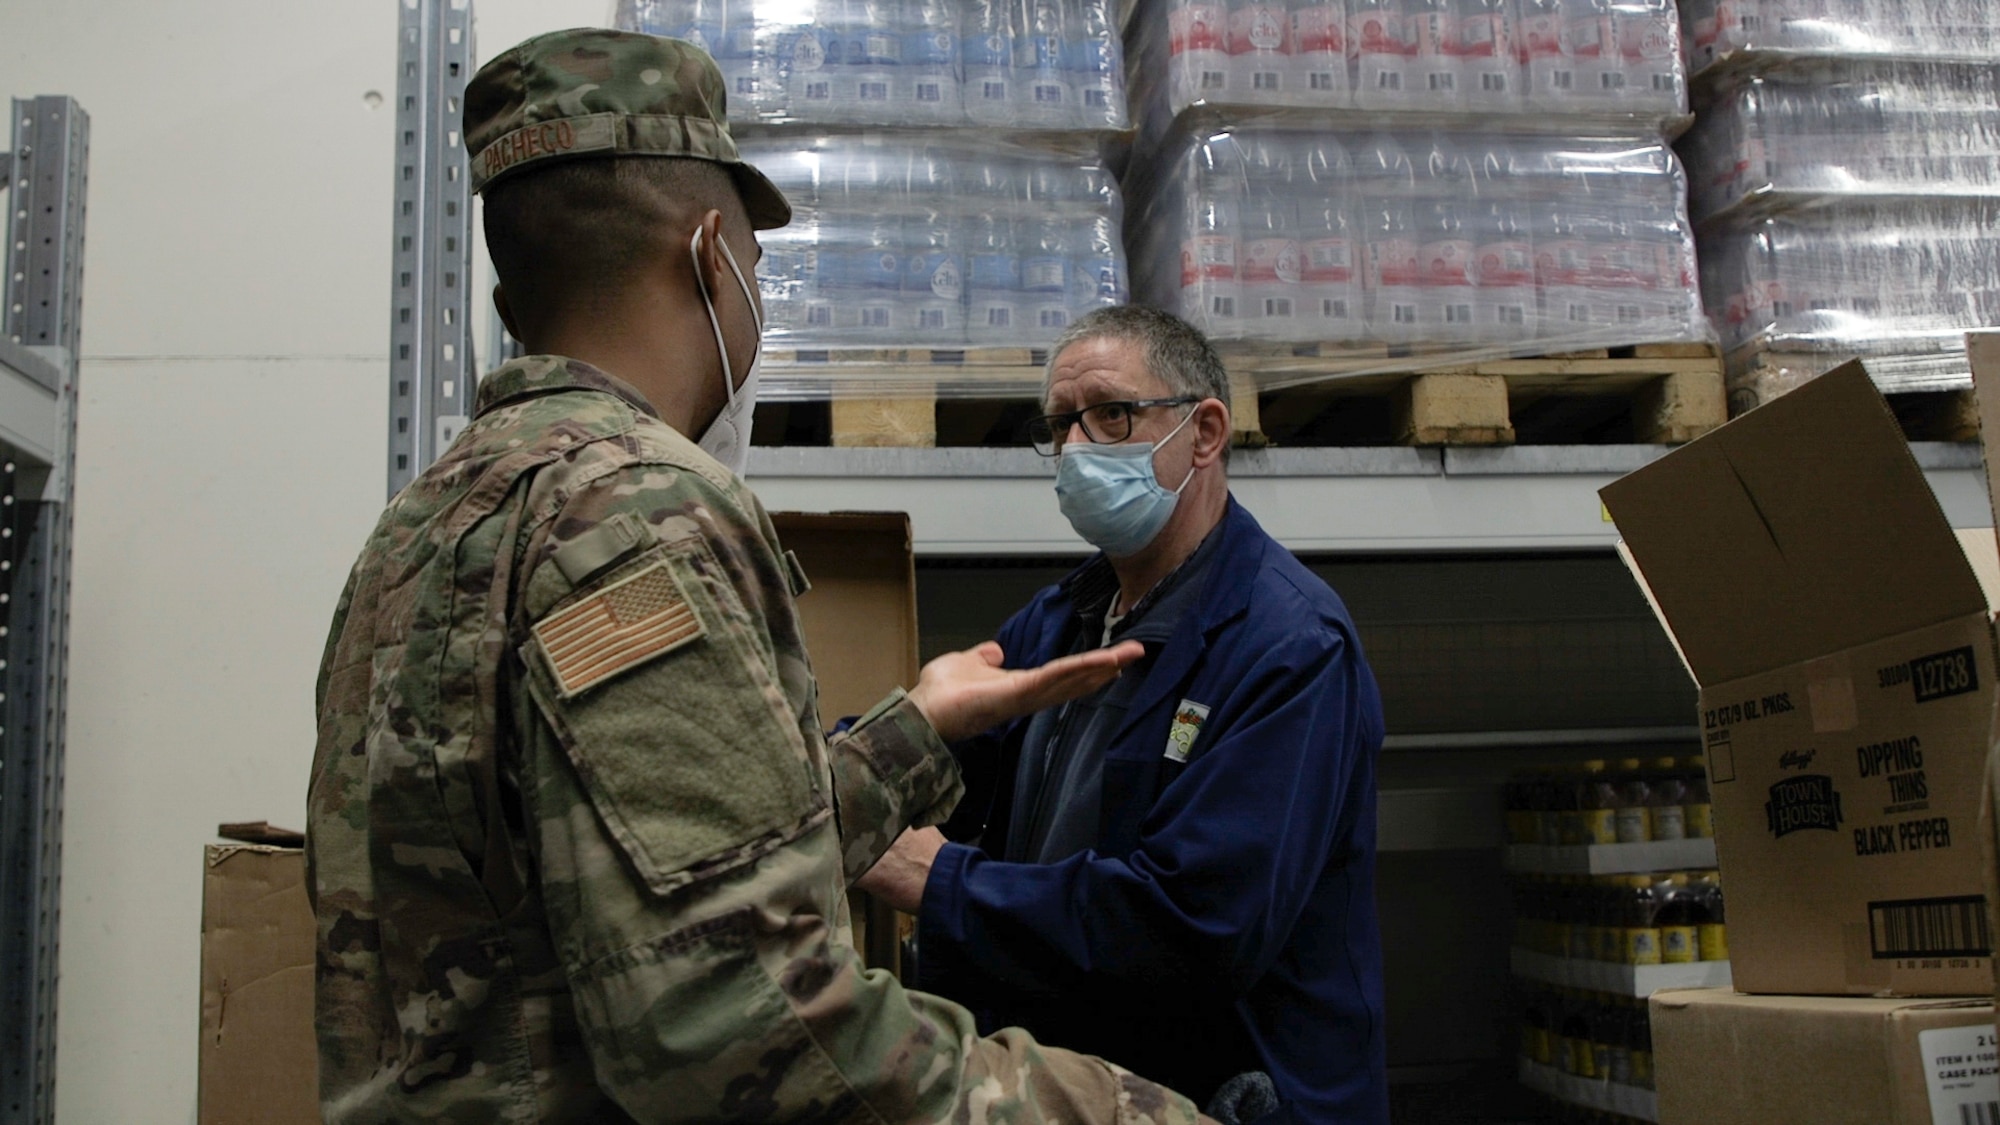 U.S. Air Force Staff Sgt. Nelson Pacheco, 52nd Medical Group Public Health technician (left), talks with a member of the Spangdahlem commissary staff during an inspection at Spangdahlem Air Base Germany, March 29, 2021. The Community Health section of Public Health, includes programs such as food inspections and sexually transmitted infections interviews. (U.S. Air Force photo by Tech. Sgt. Warren D. Spearman Jr.)